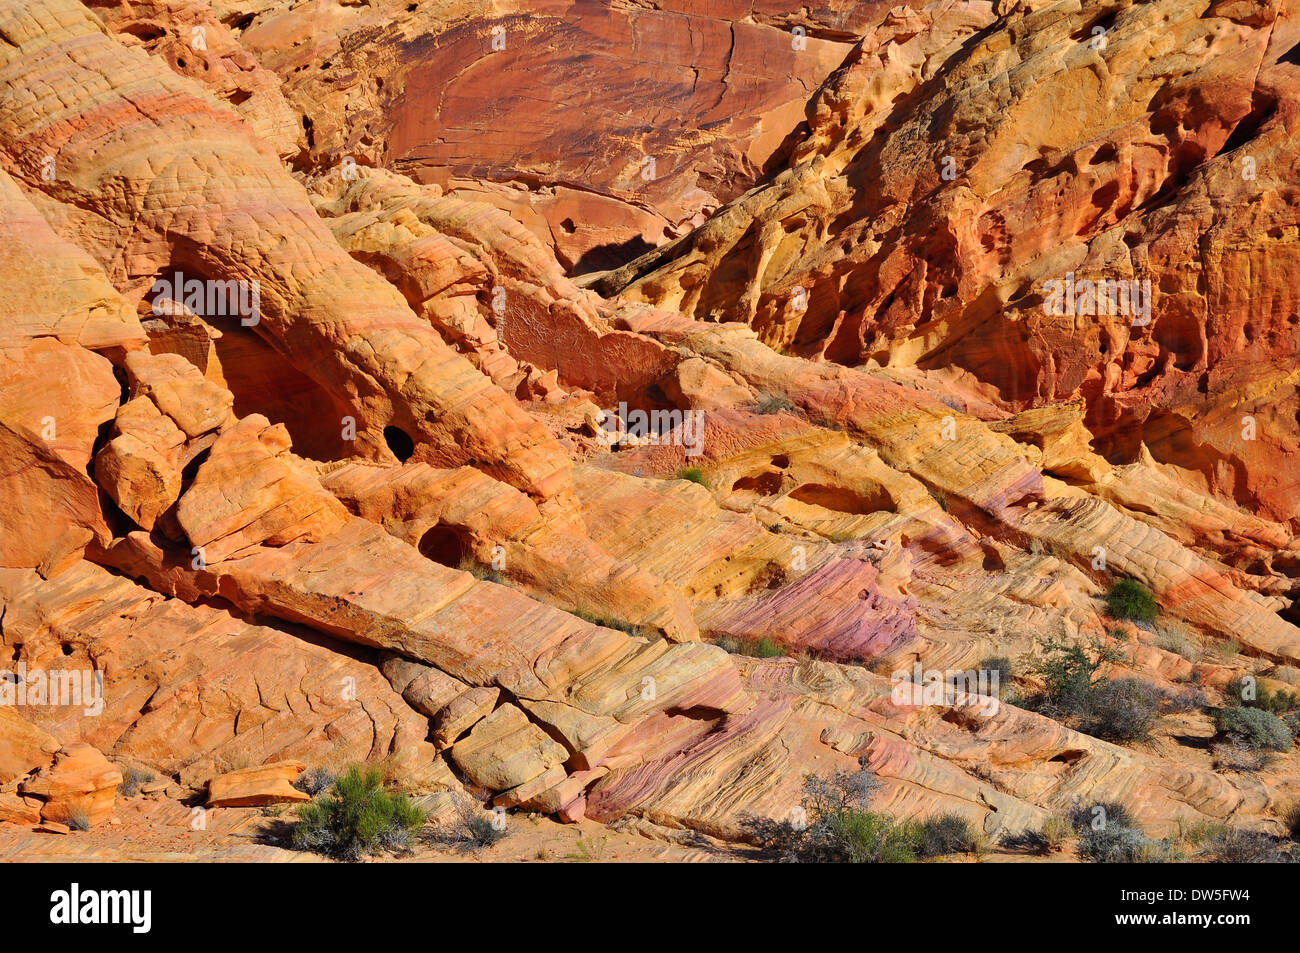 Rocky terrain in the Valley of Fire national park, Nevada, USA Stock Photo